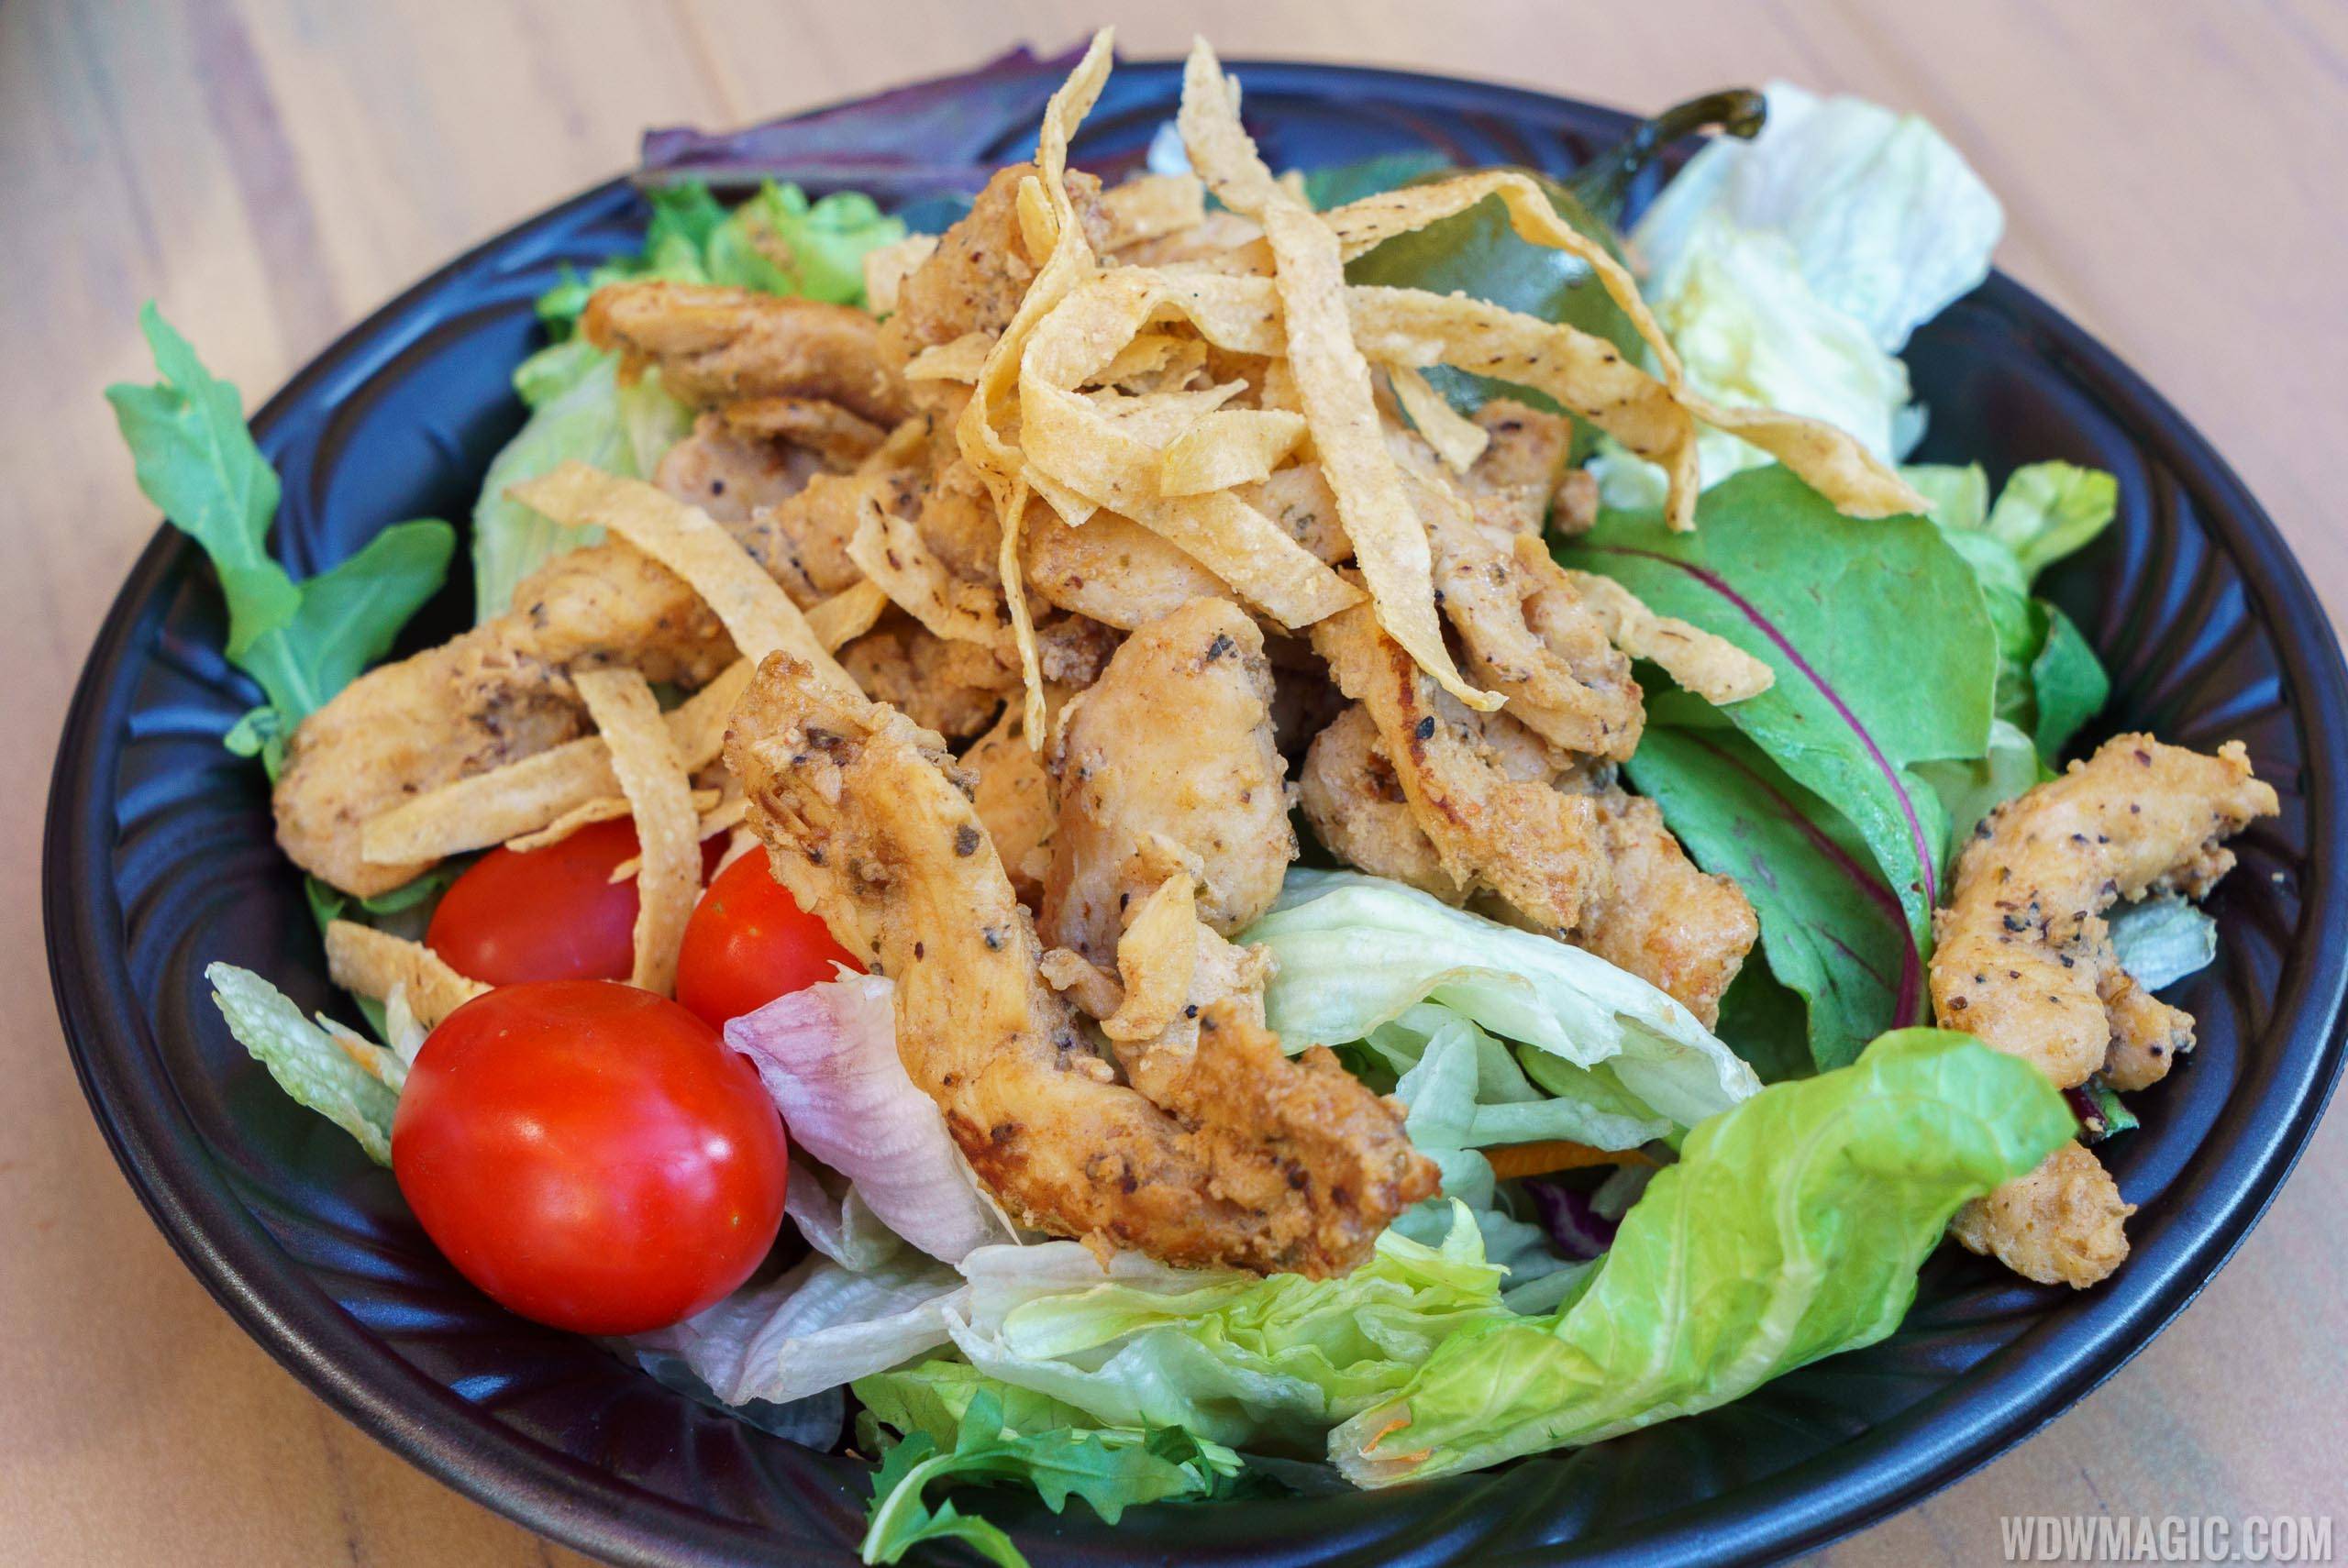 Pecos Bill Cafe - Southwest Salad with Chicken